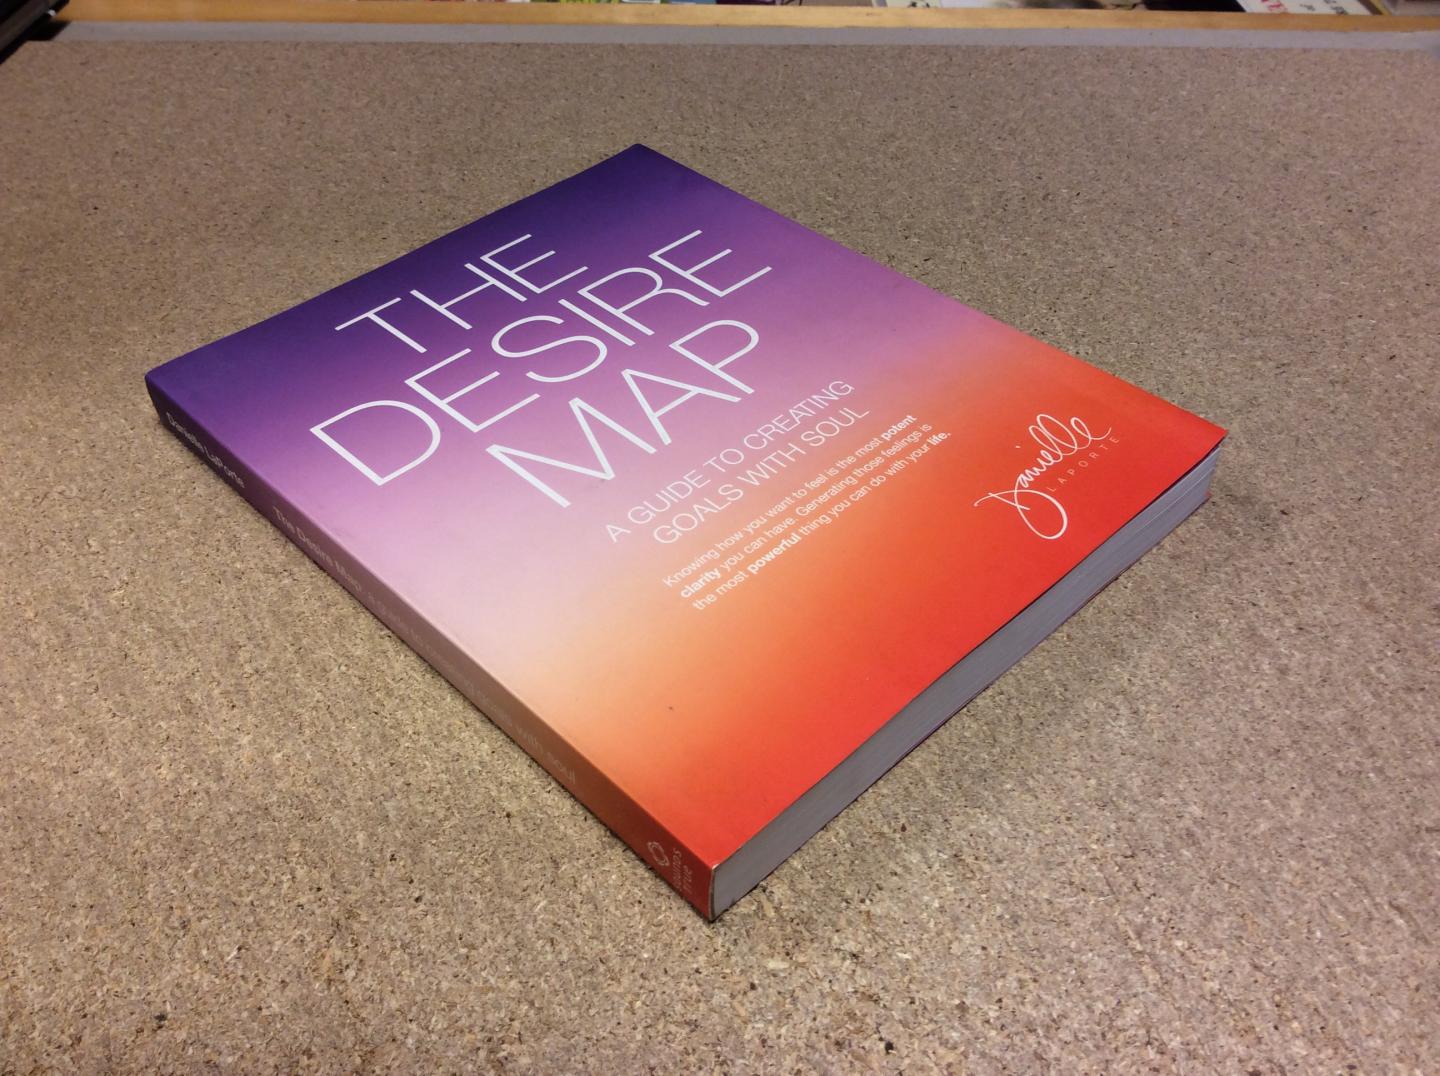 LaPorte, Danielle - The Desire Map. A Guide to Creating Goals with Soul